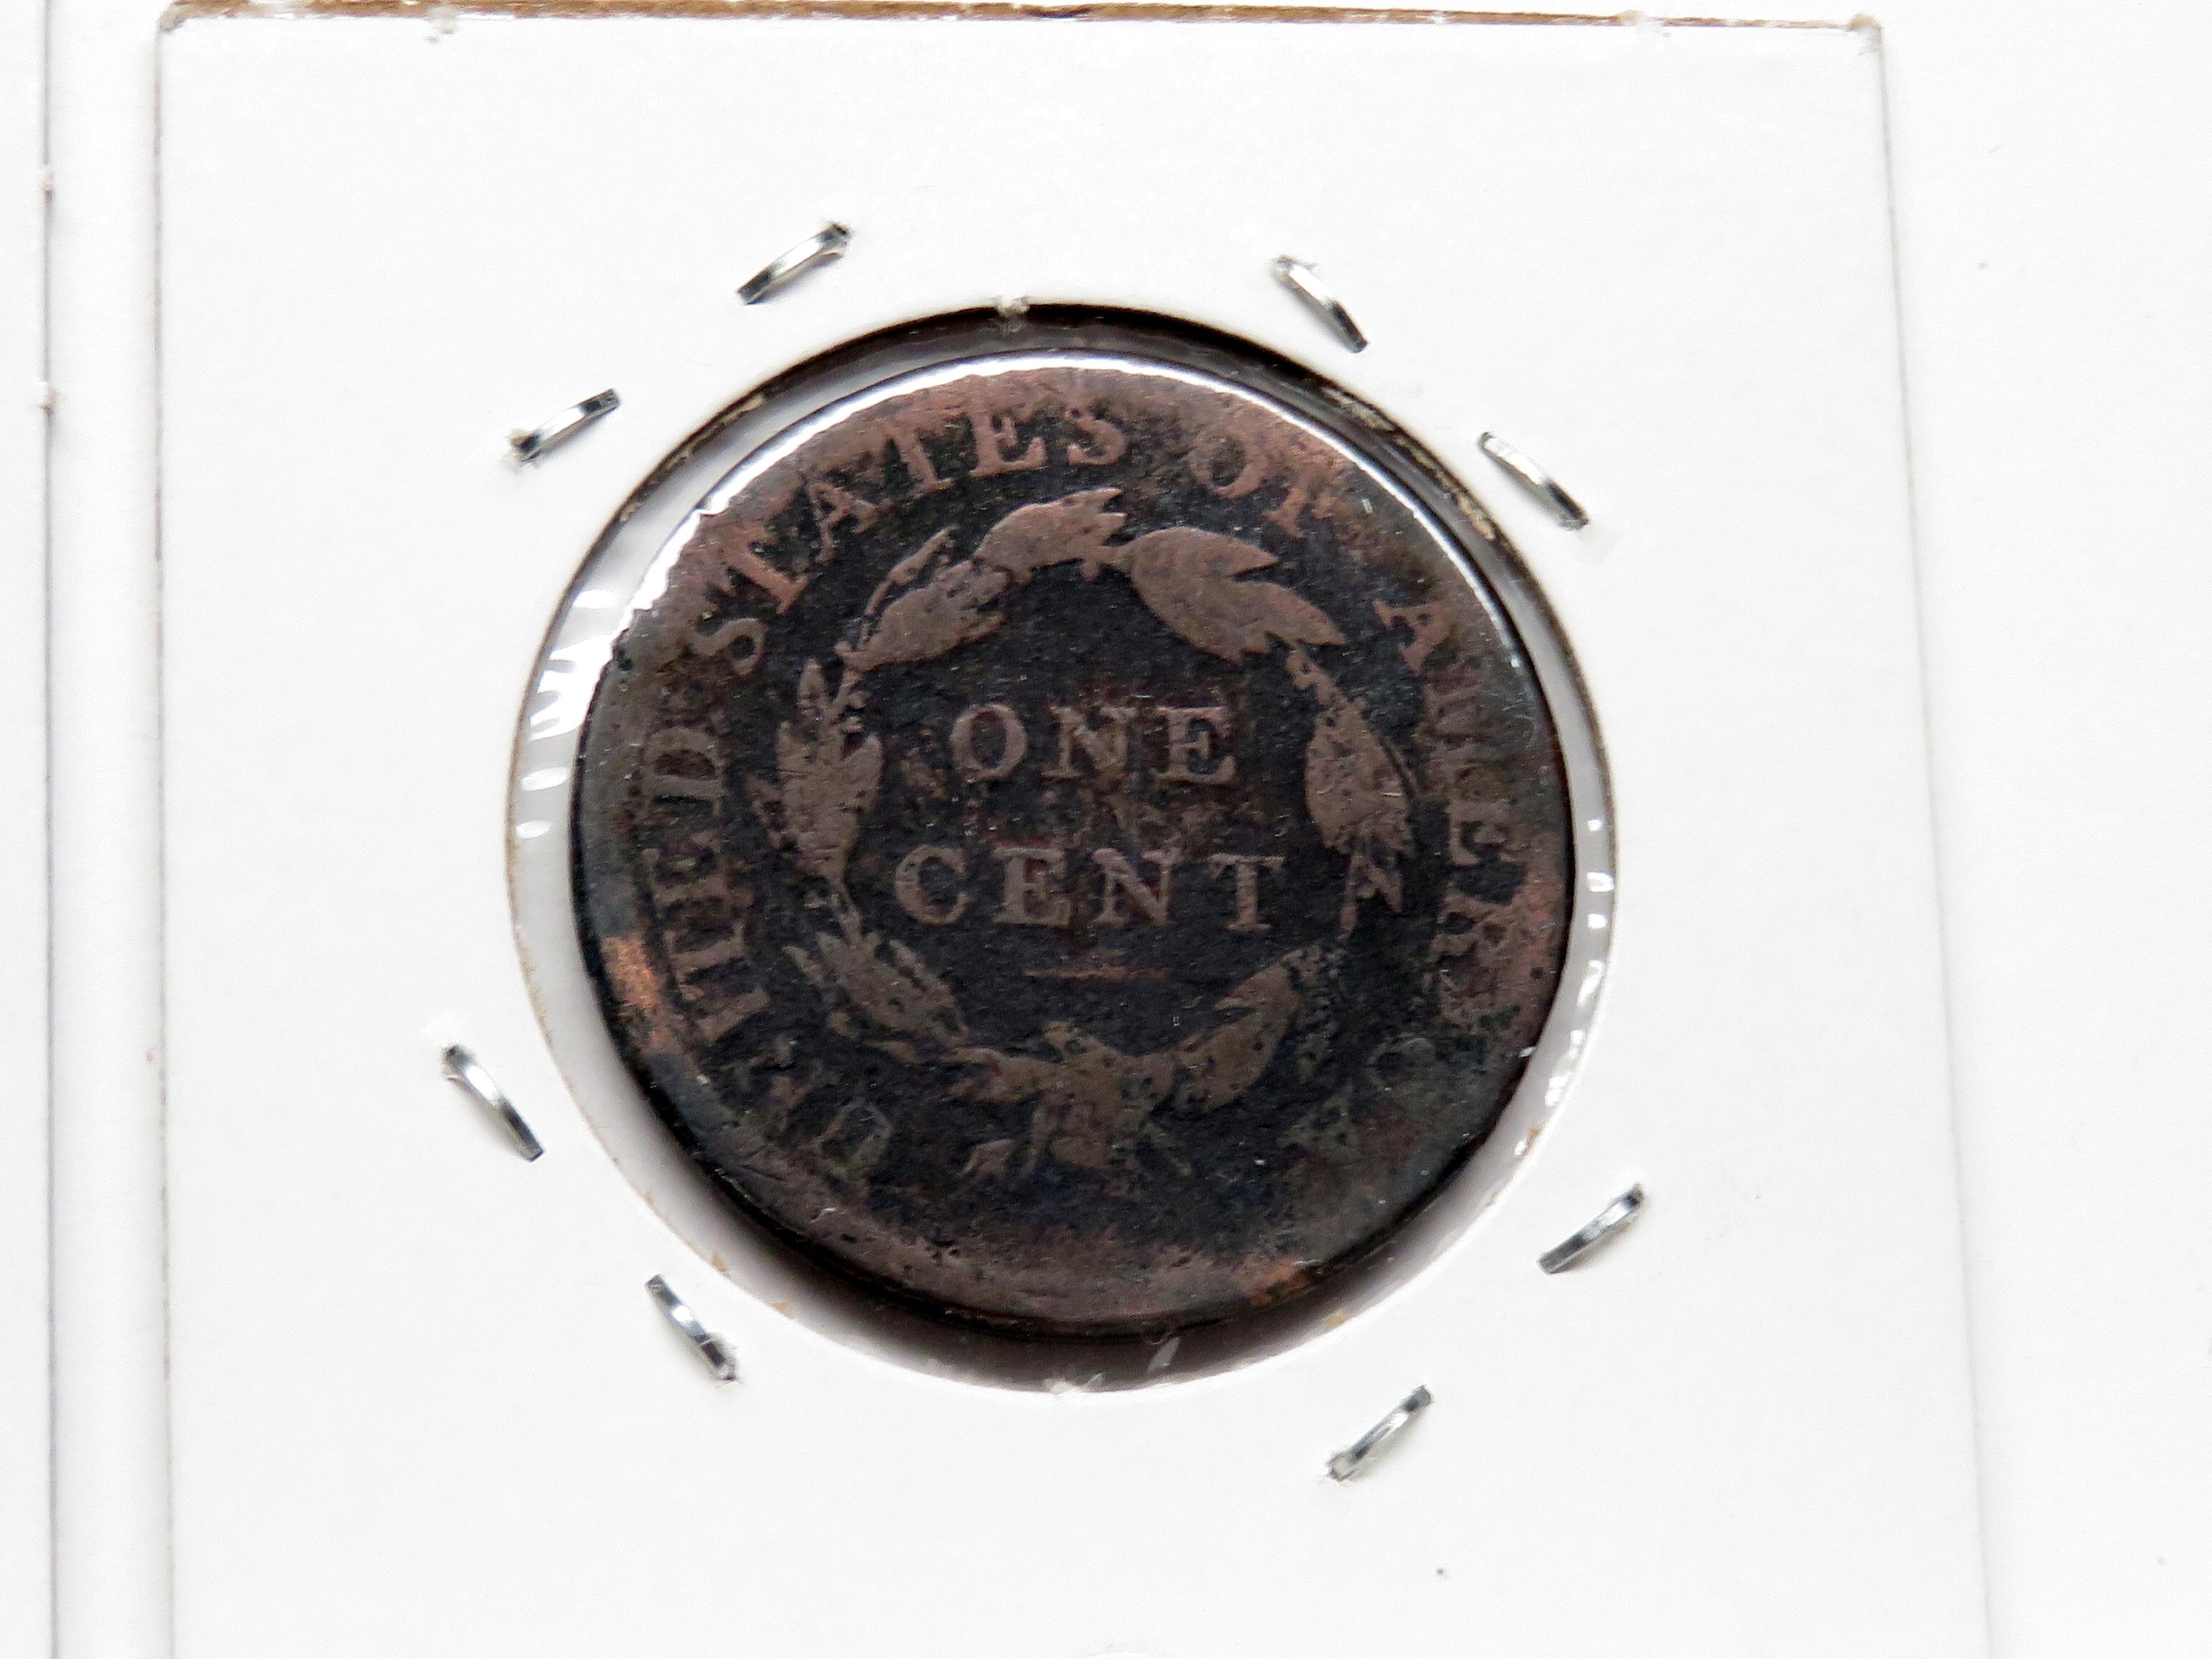 2 Type Cents: Draped Bust with chop marks; Classic Head 1814 corrosion